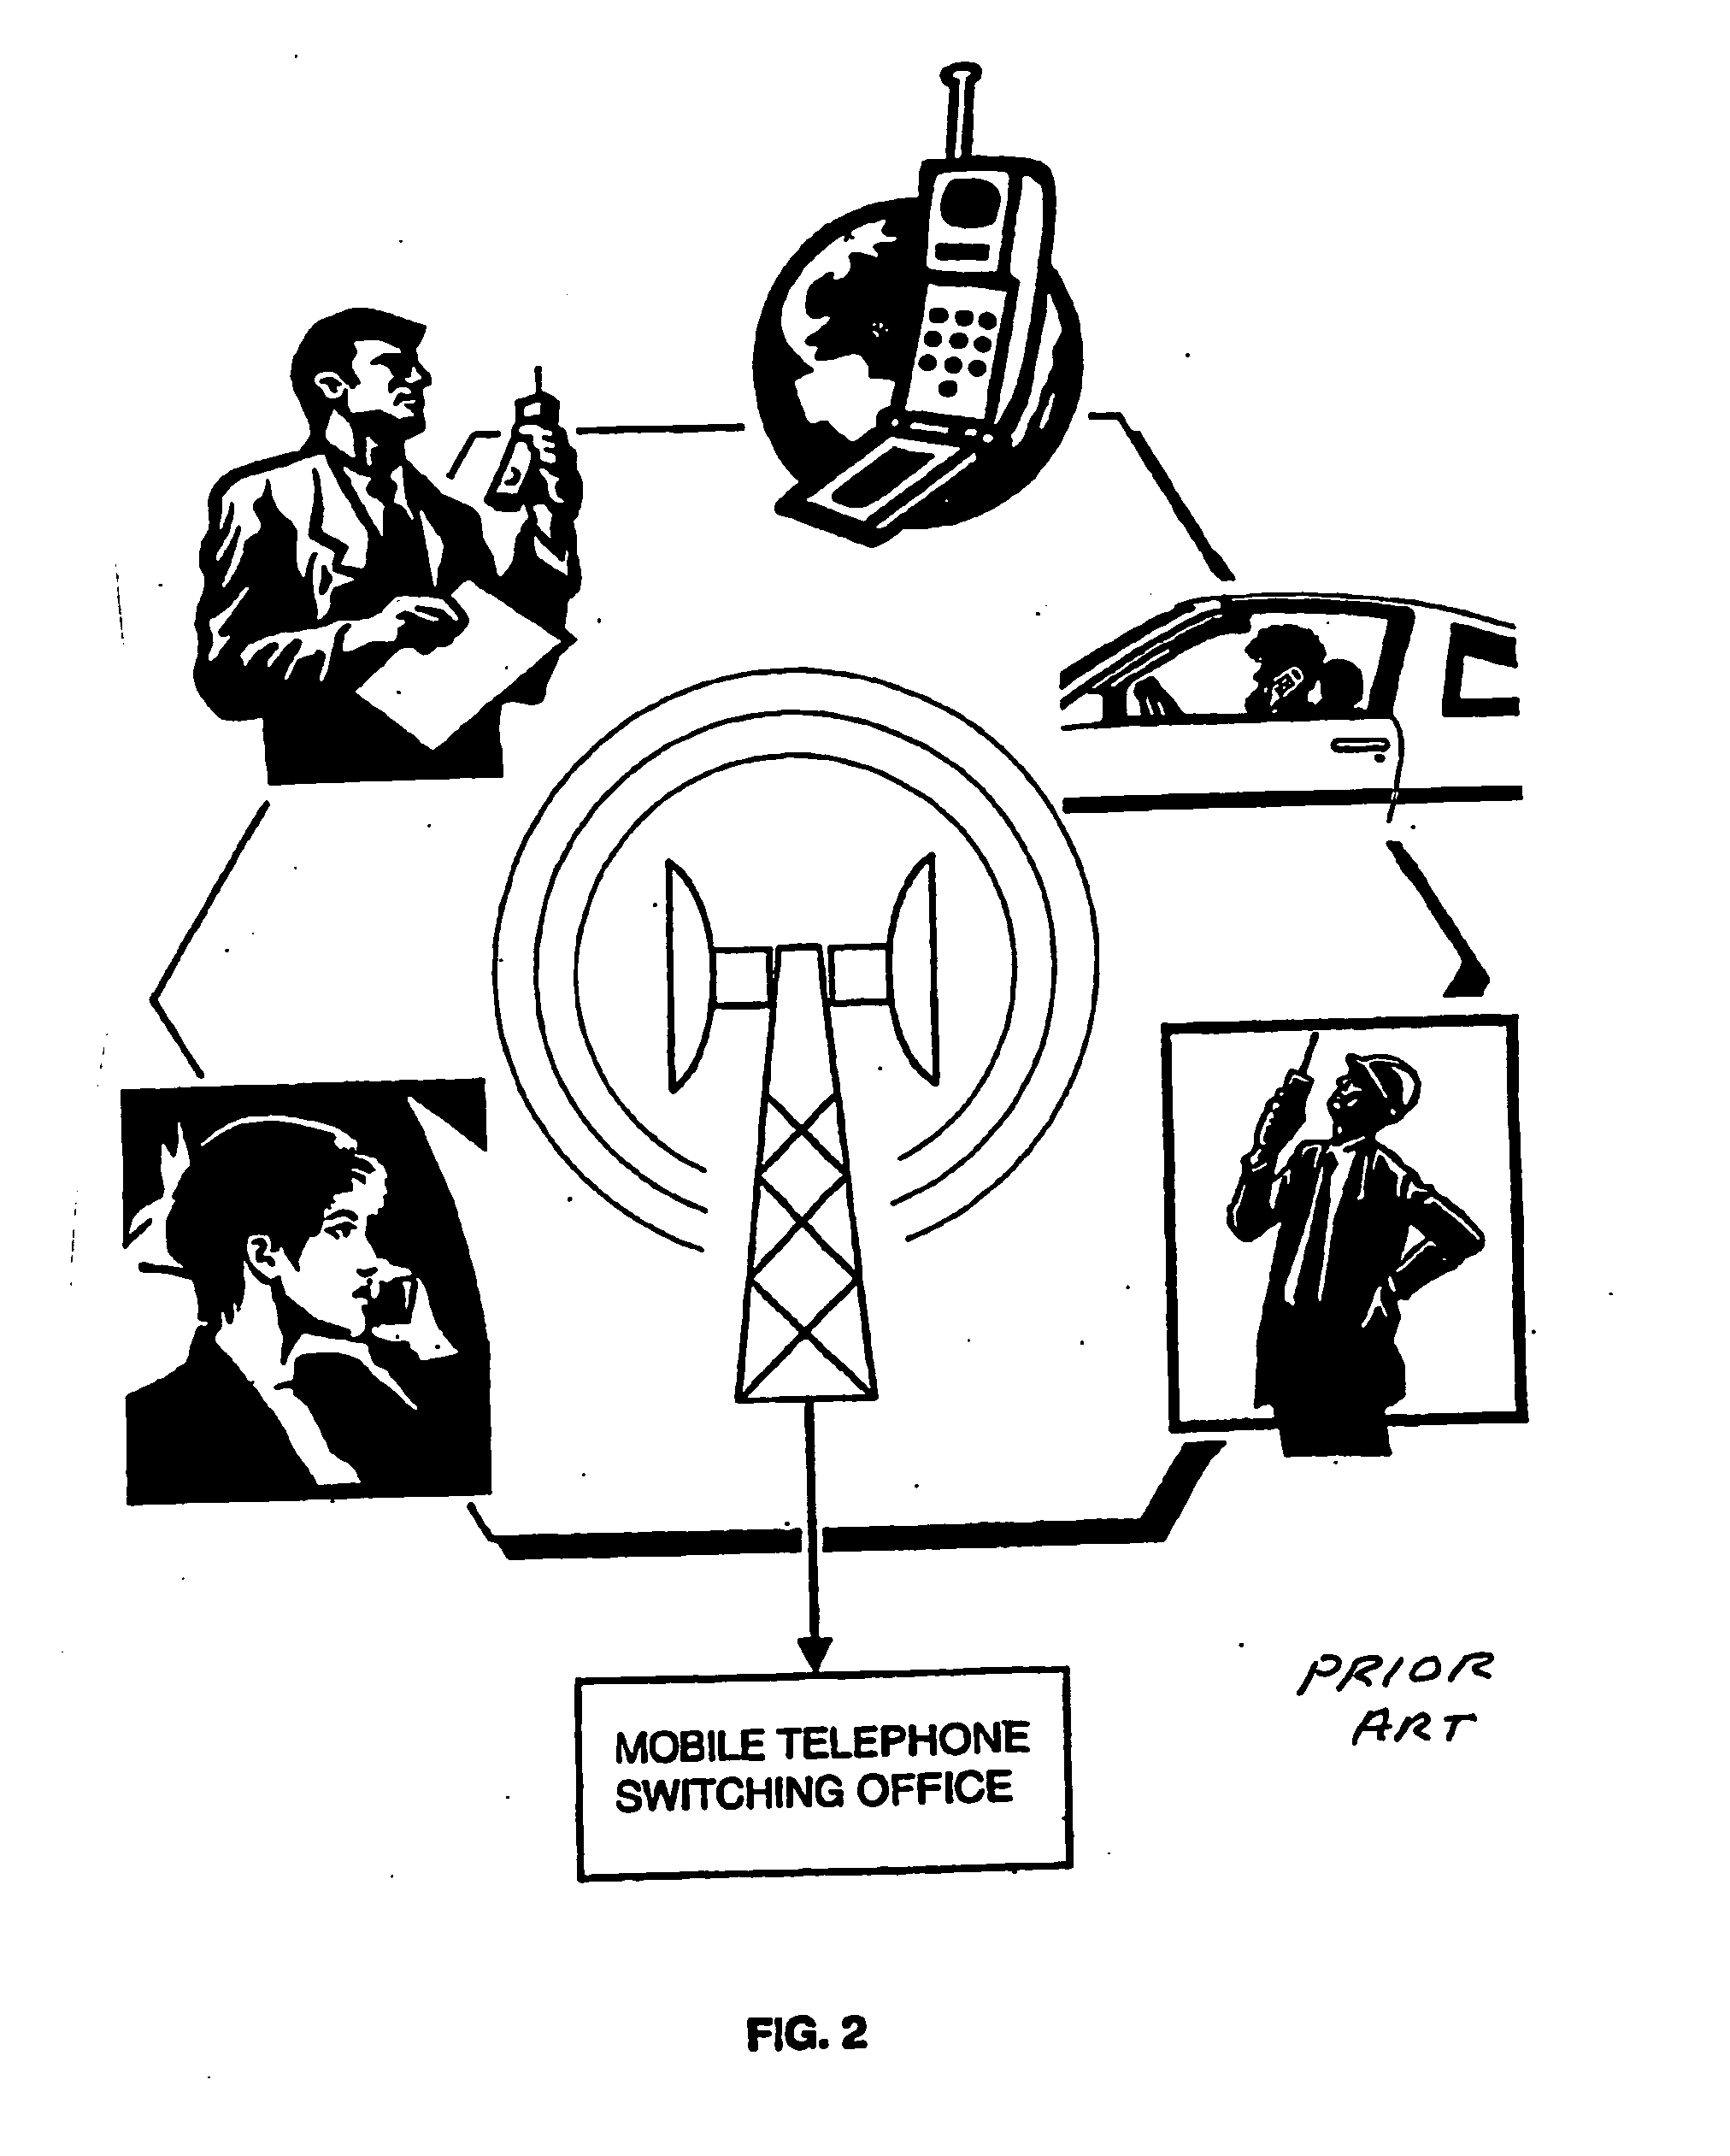 Cellular systems with distributed antennas